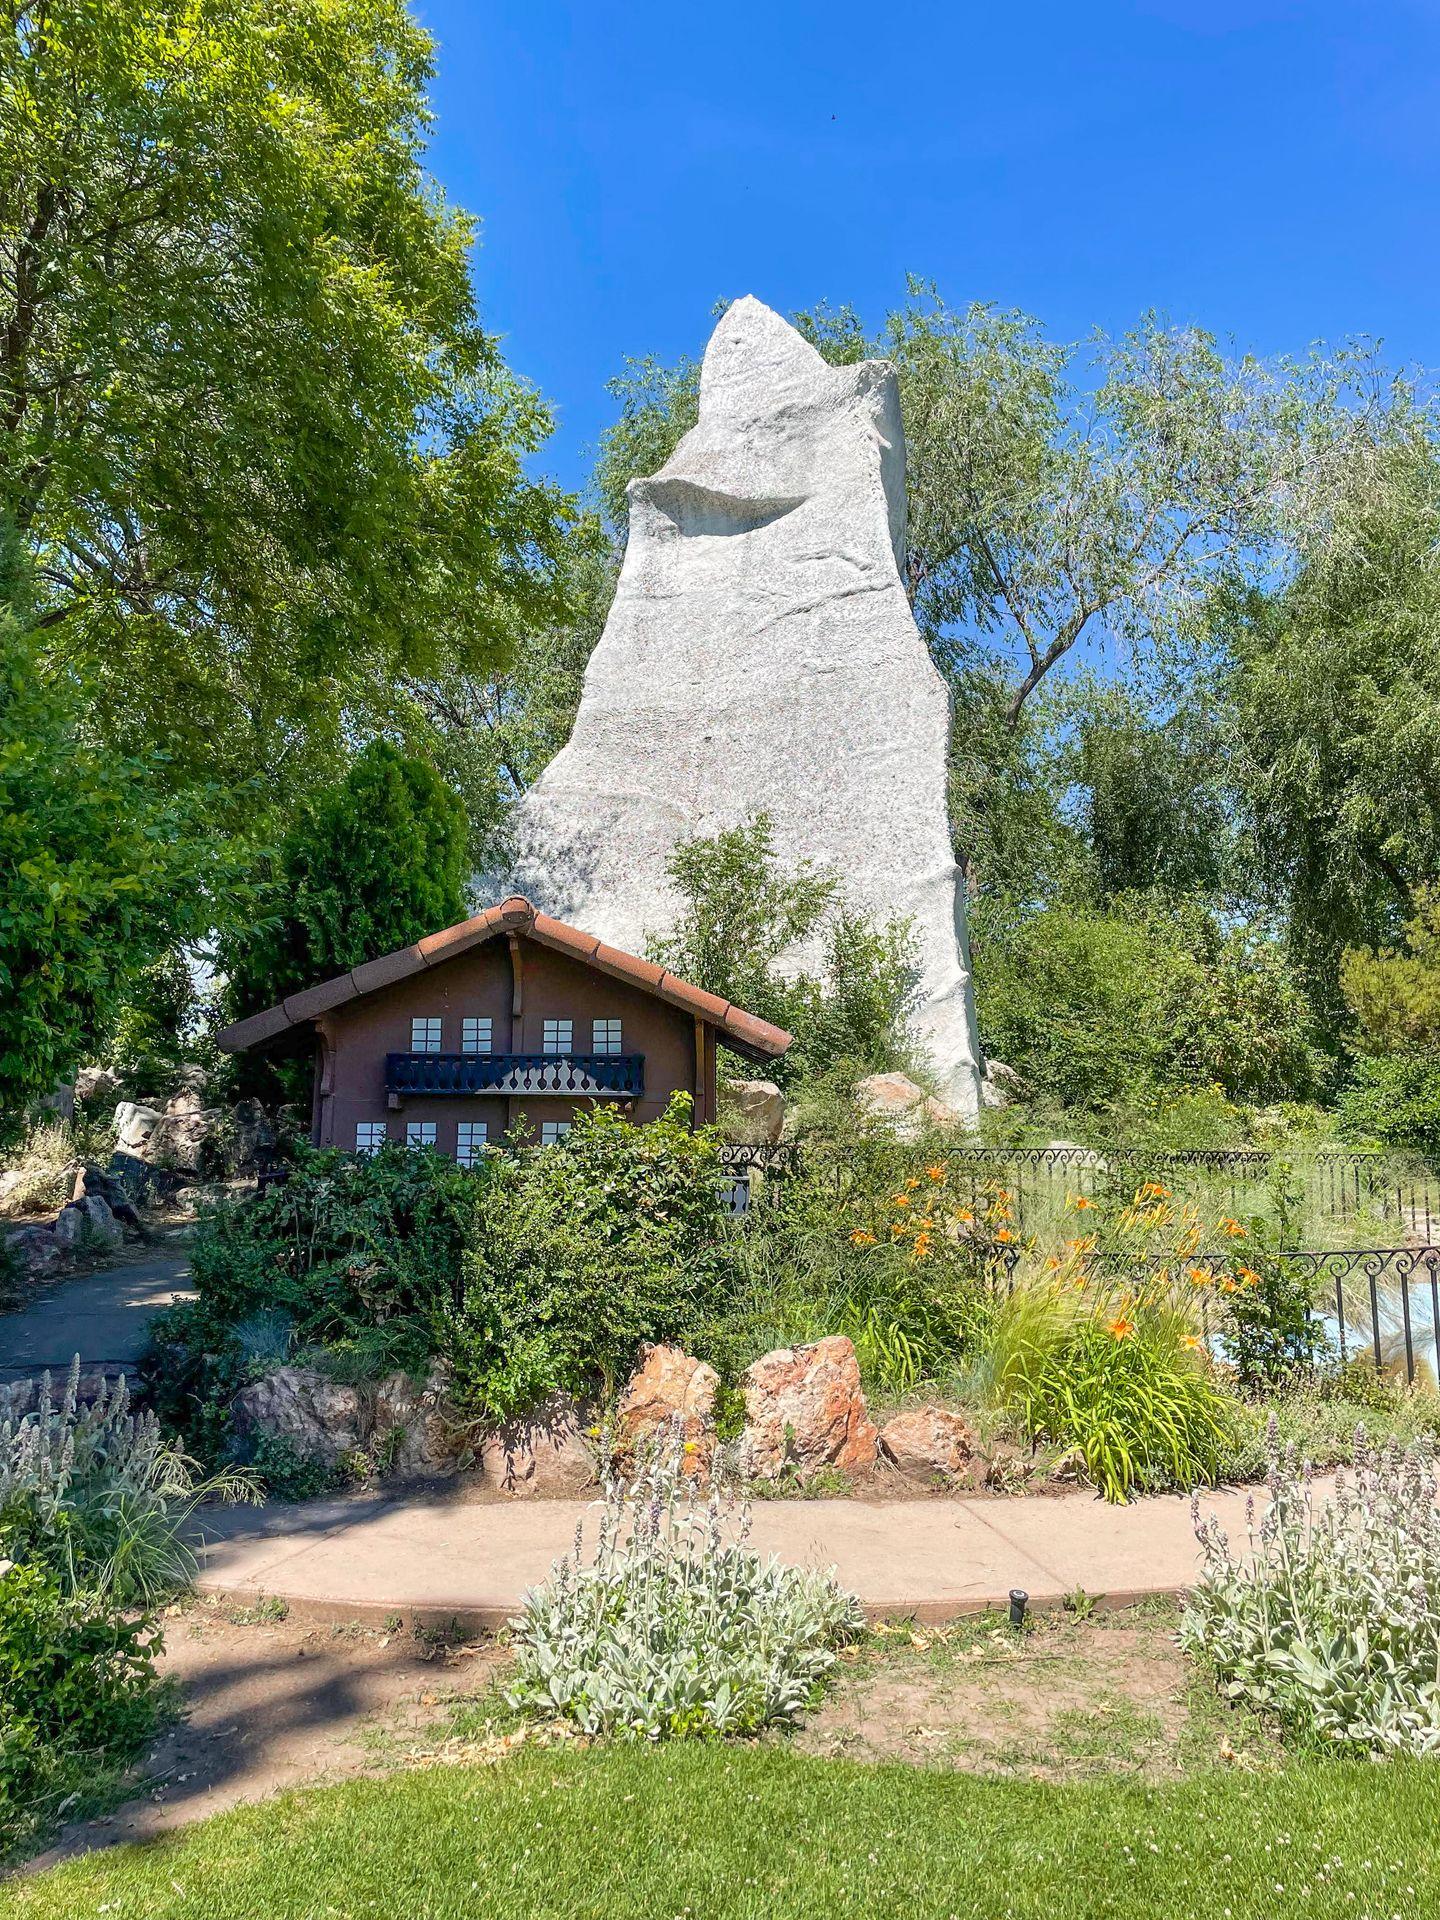 A large rock behind a house, representing Switzerland at the International Peace Gardens in Salt Lake City.